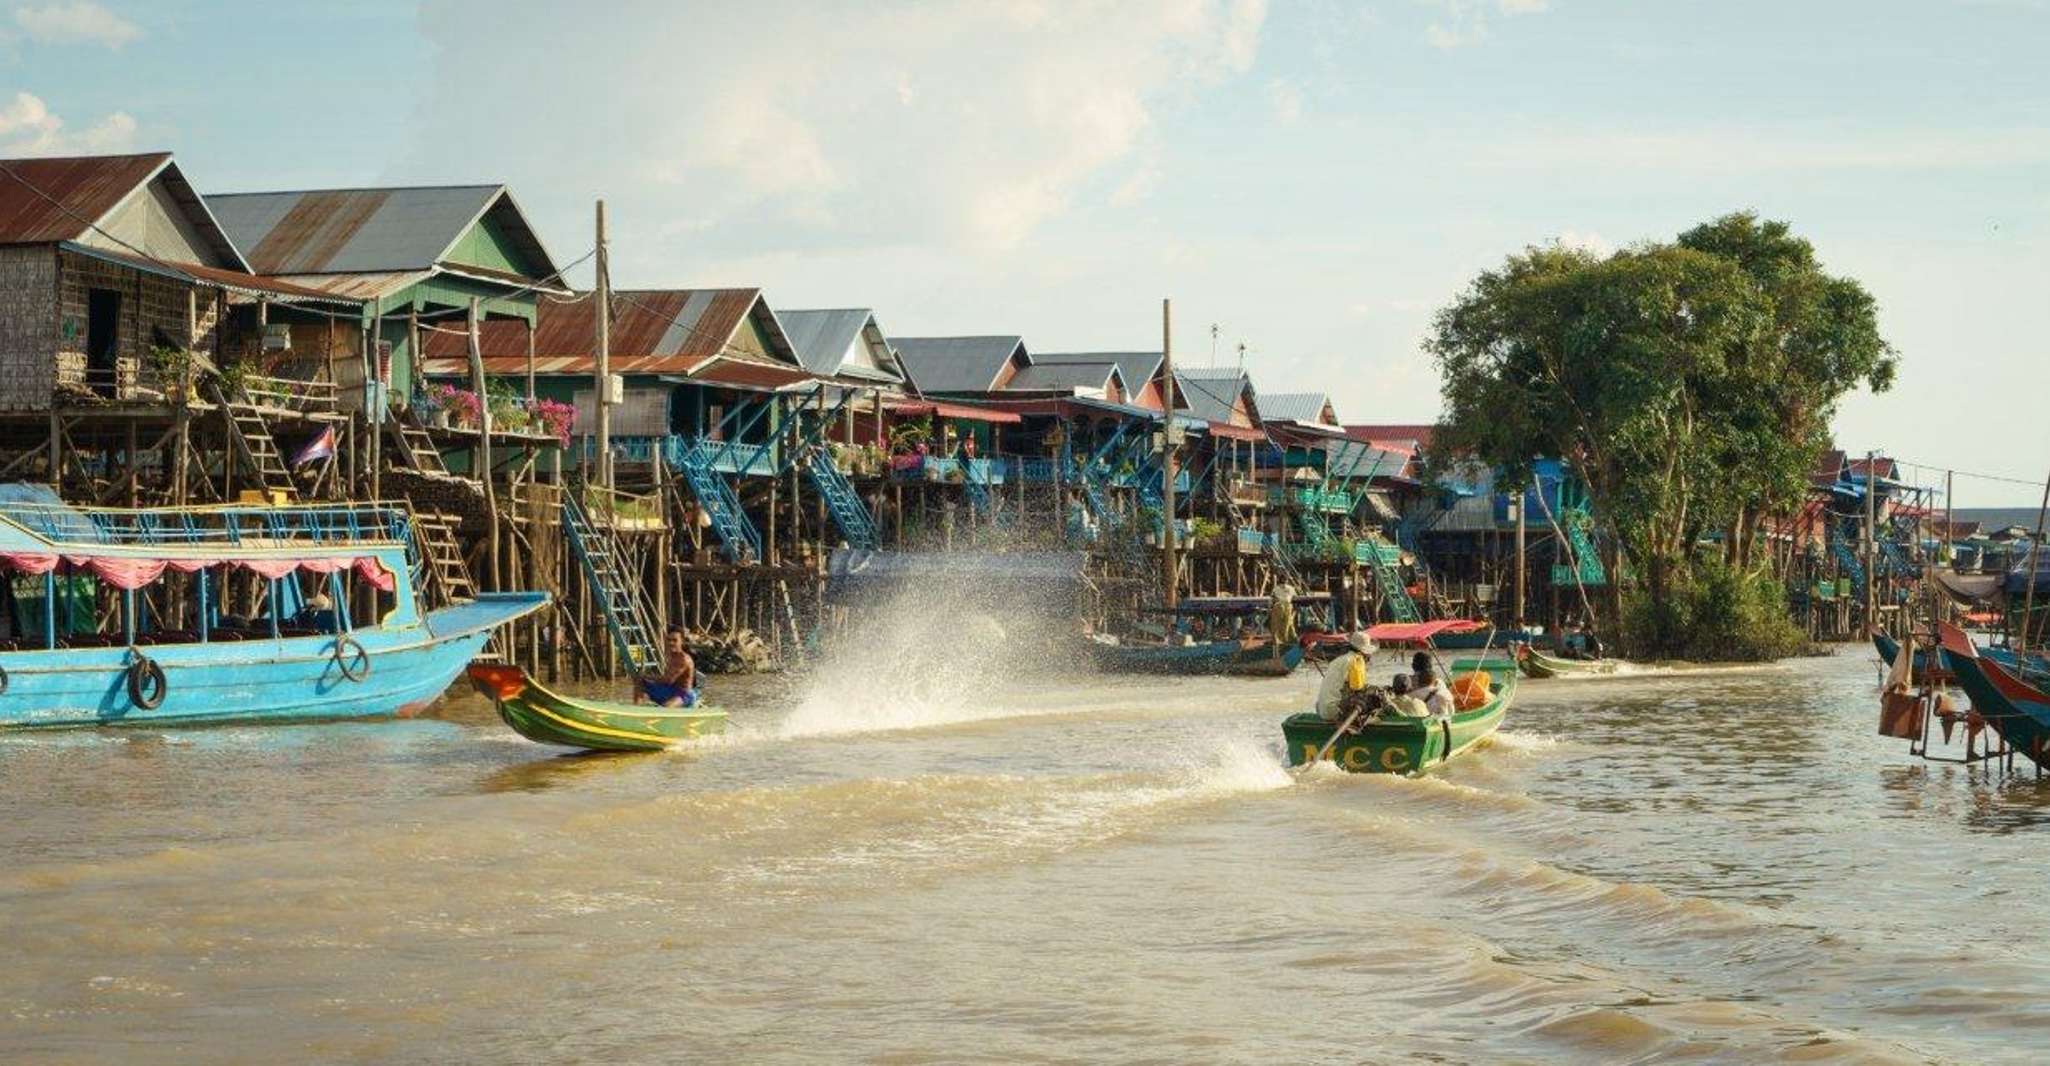 From Siem Reap, Kampong Phluk Floating Village Tour by Boat